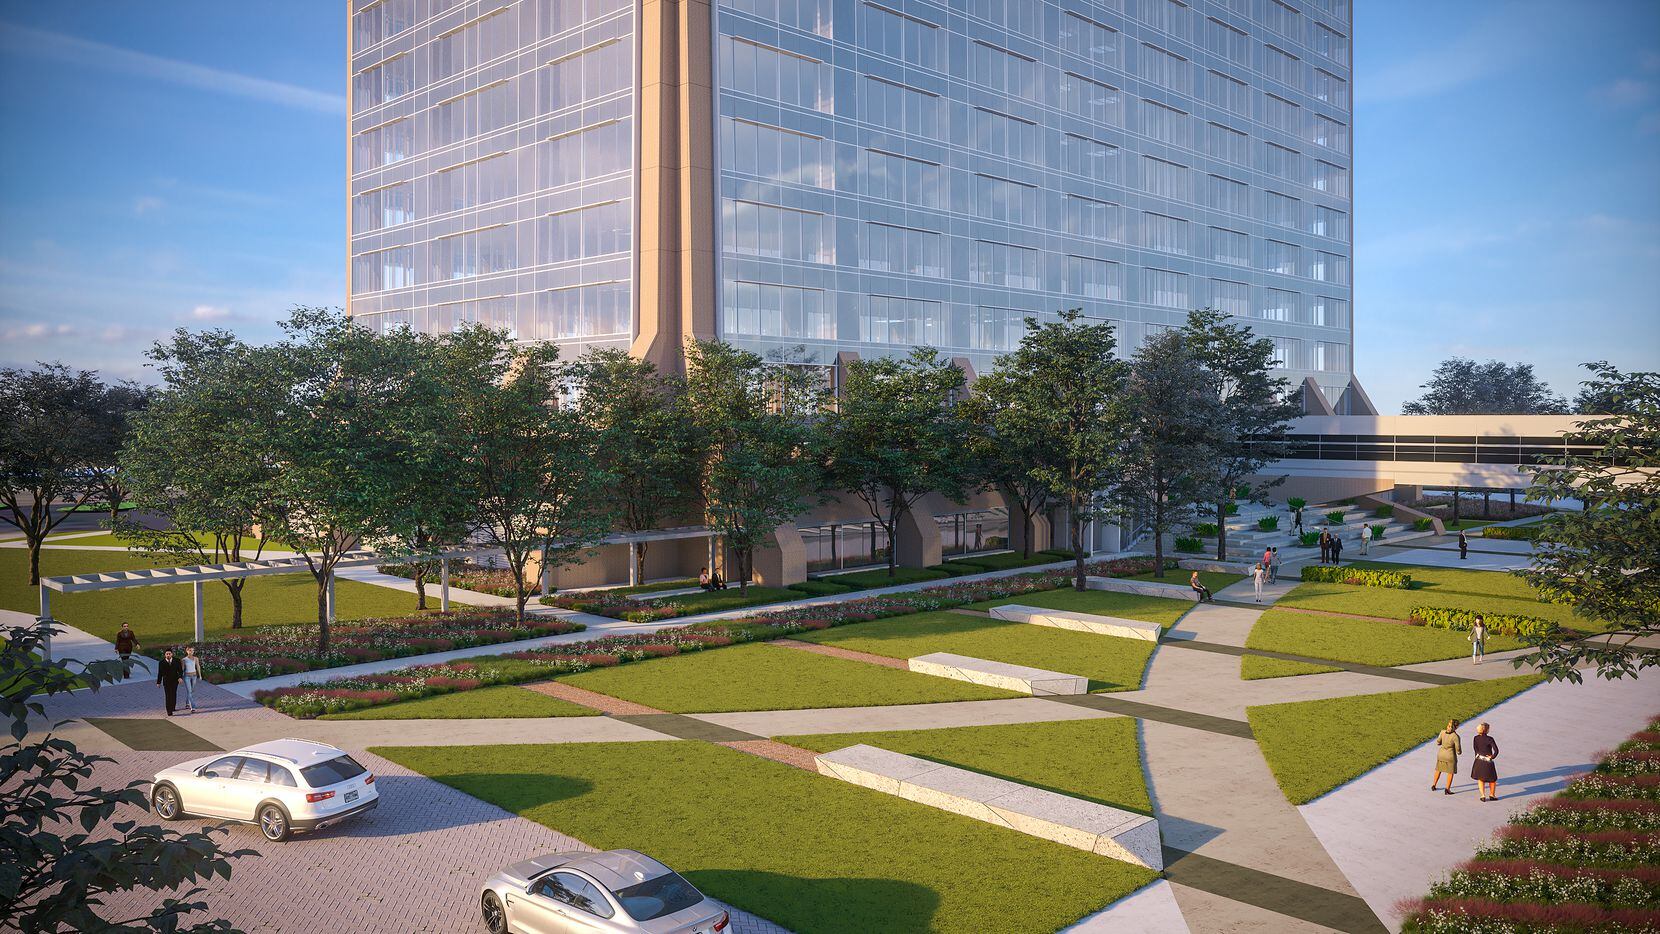 The 23-acre Pegasus Park campus surrounding the high-rise will be redone with outside areas...